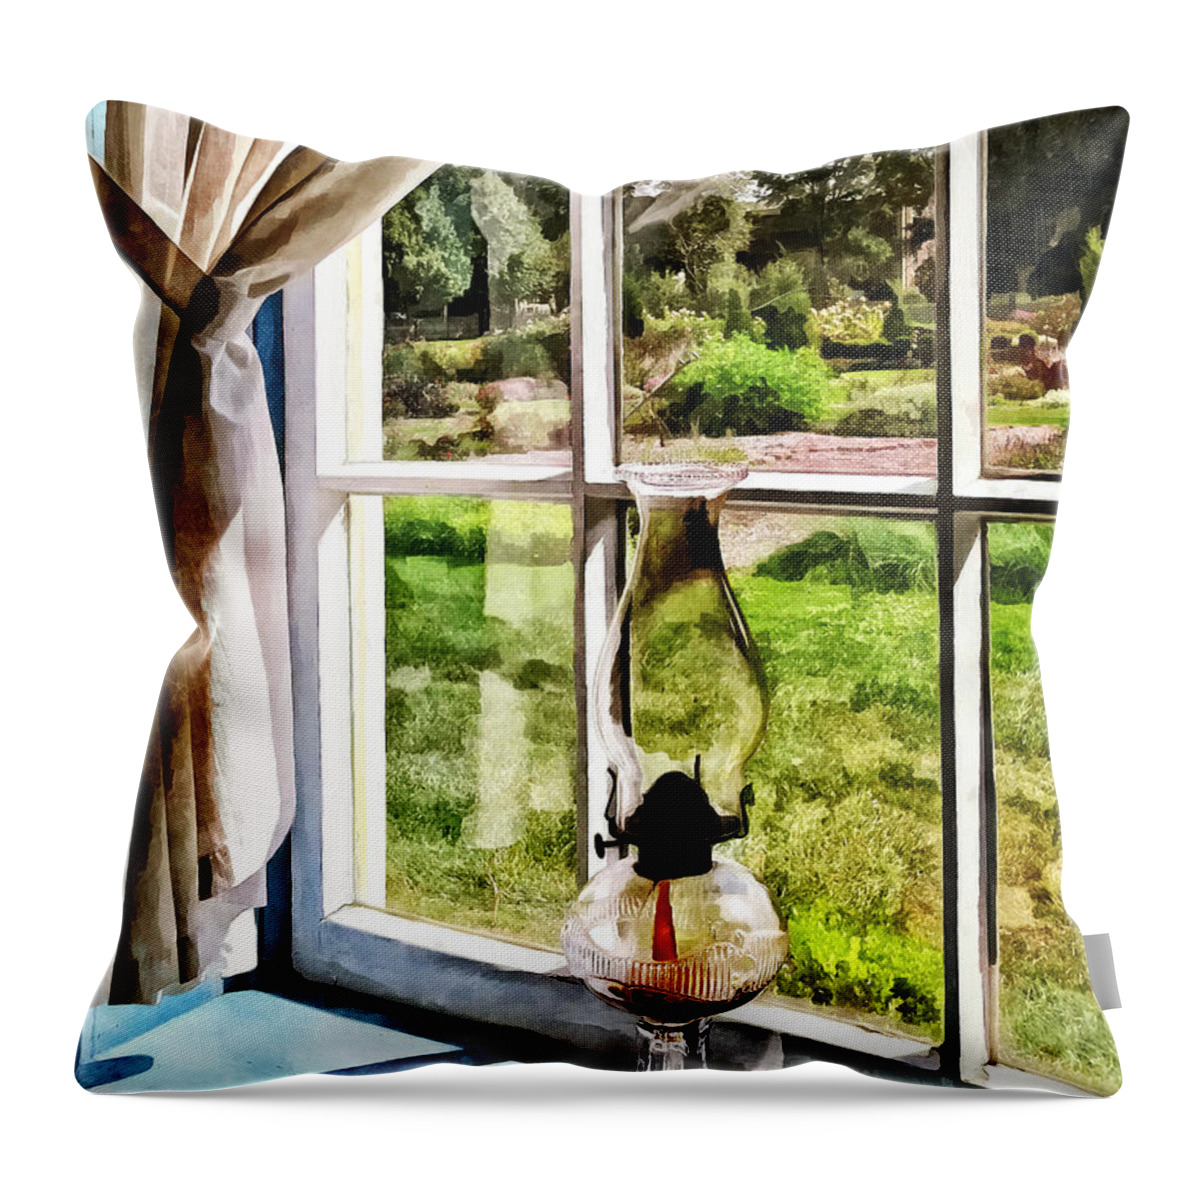 Lamp Throw Pillow featuring the photograph Hurricane Lamp in a Sunny Window by Susan Savad